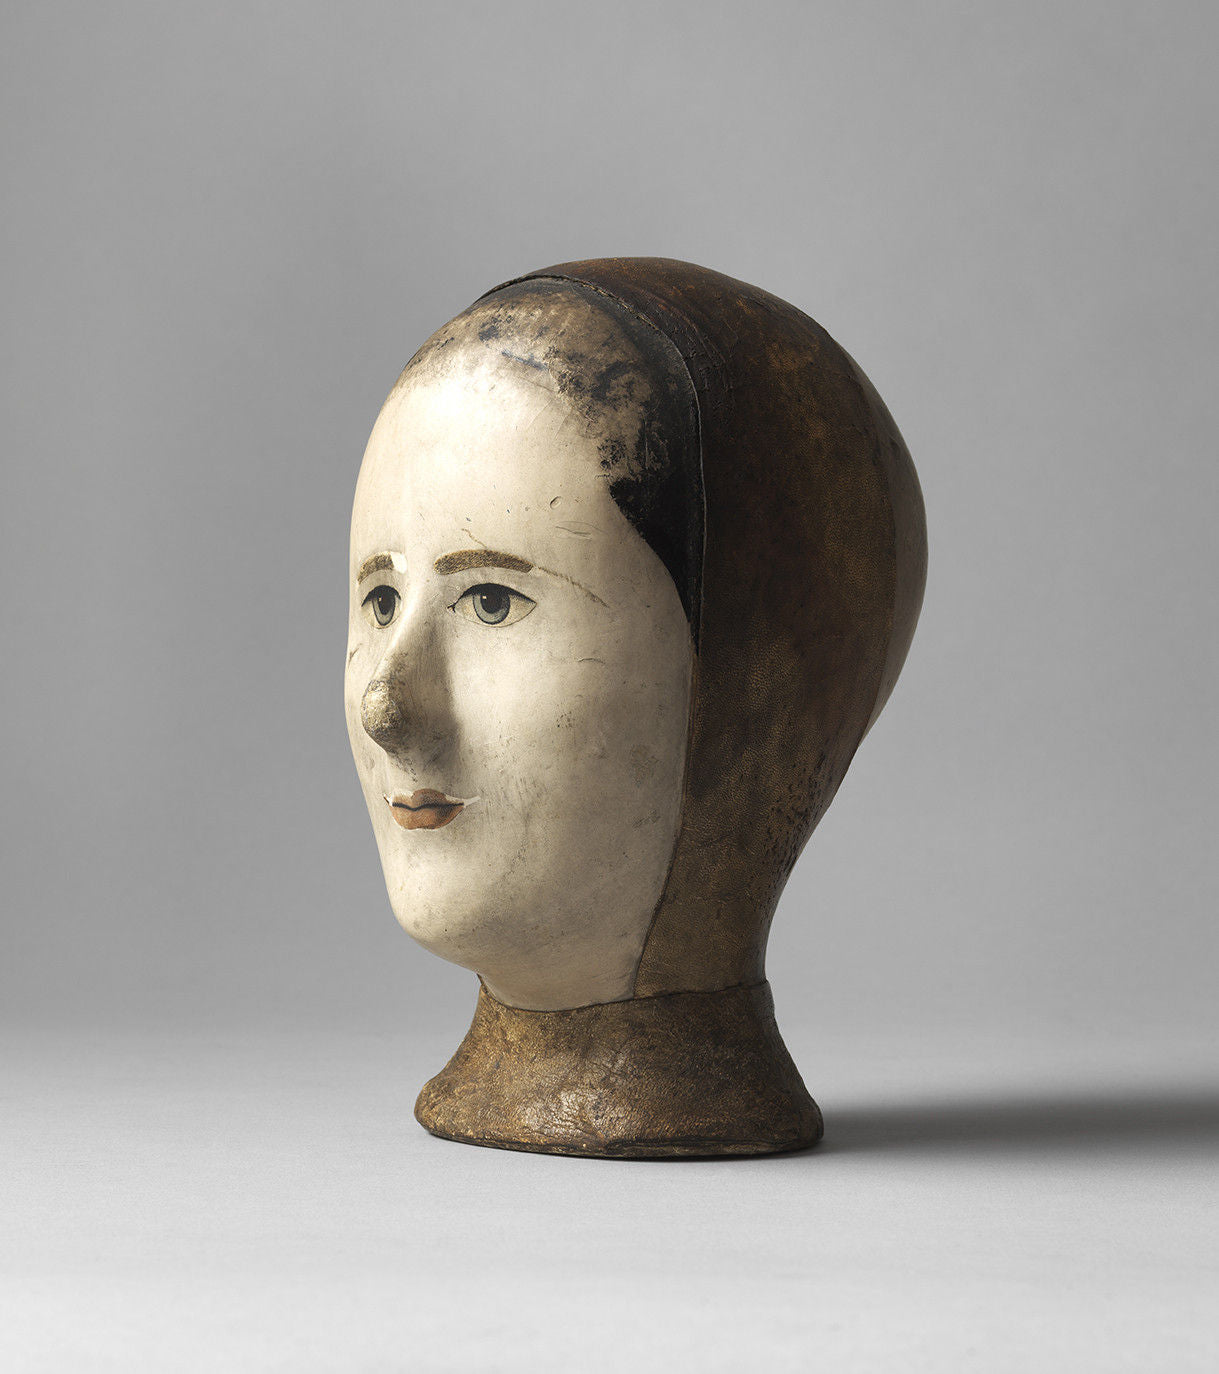 Particularly Fine and Sensitive Early Milliner’s Head